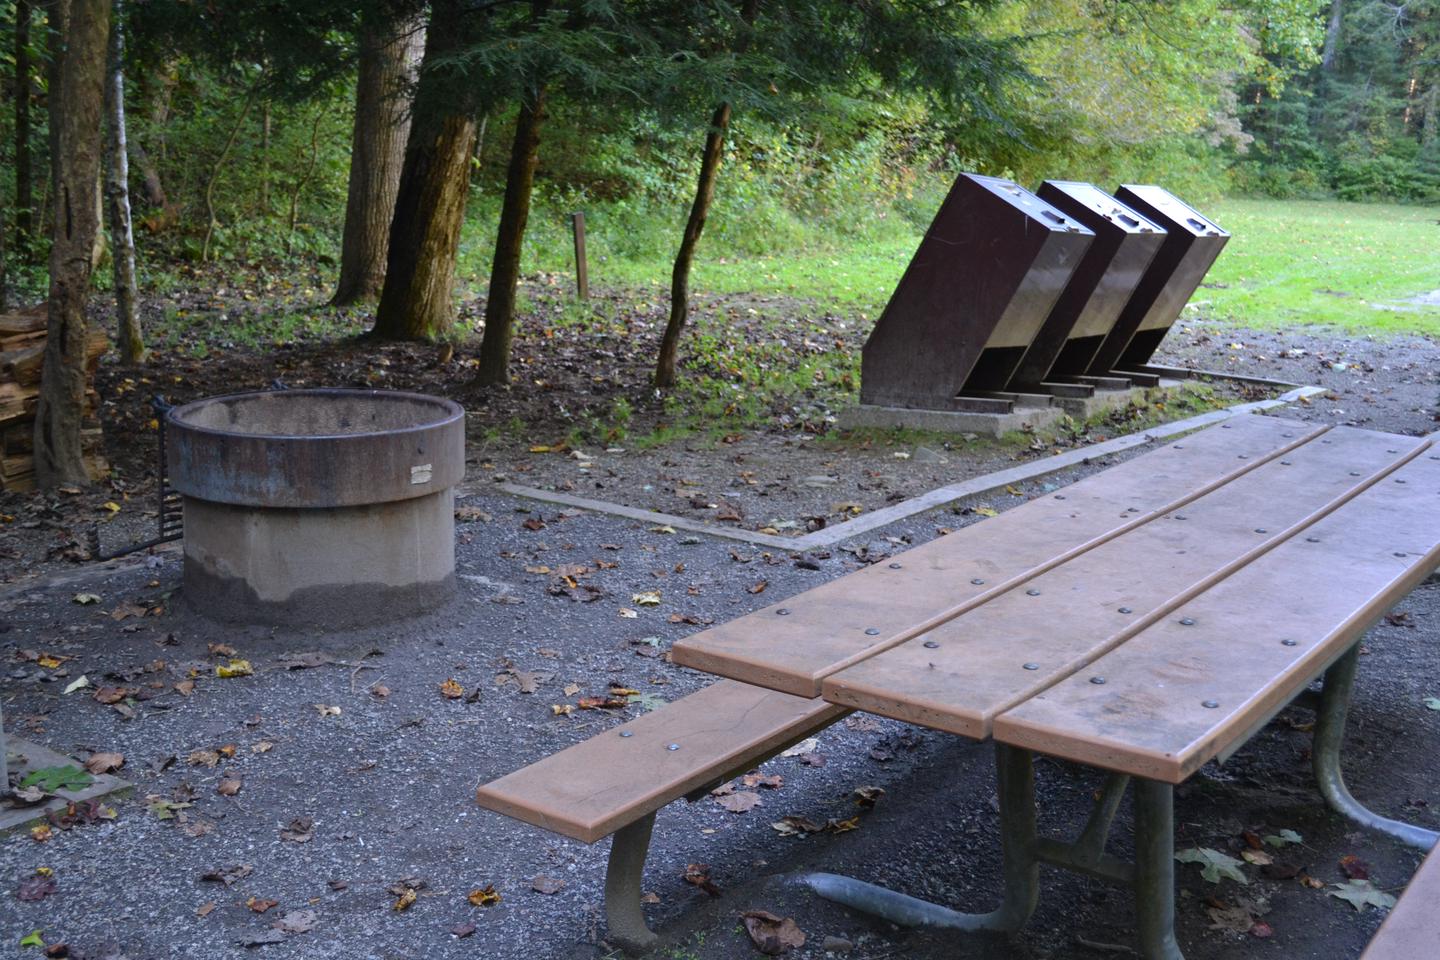 Cataloochee Group Camp Site 3Picnic table located near accessible fire pit (double insulated and elevated for safety).  